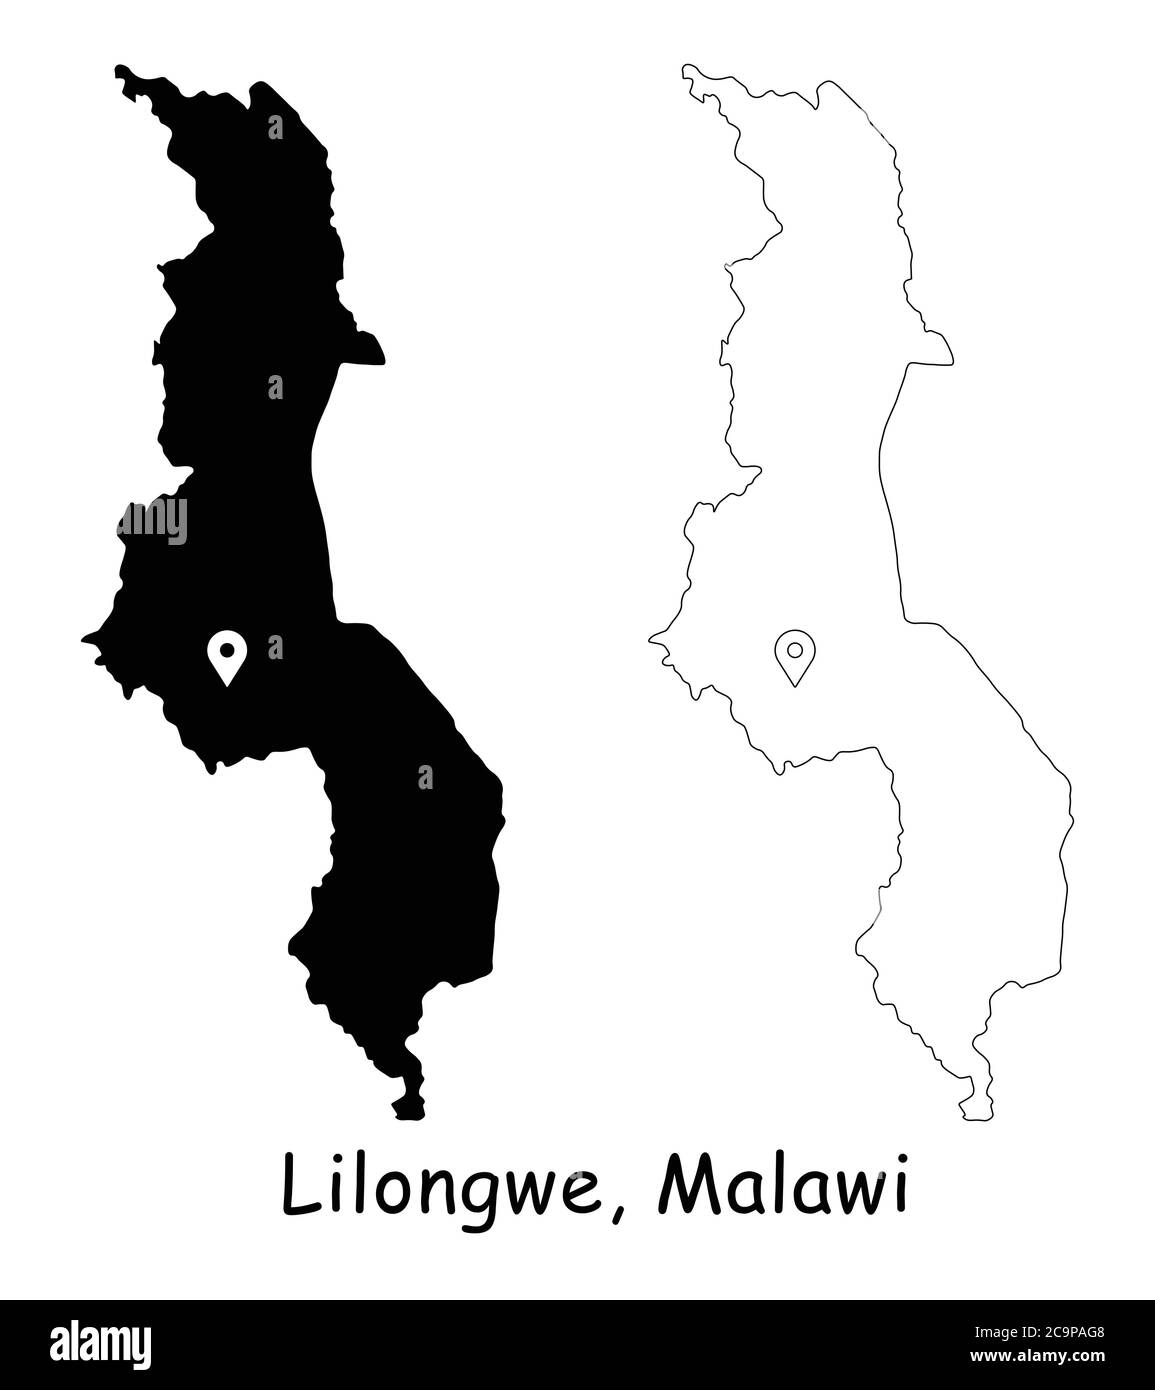 Lilongwe Malawi. Detailed Country Map with Location Pin on Capital City. Black silhouette and outline maps isolated on white background. EPS Vector Stock Vector